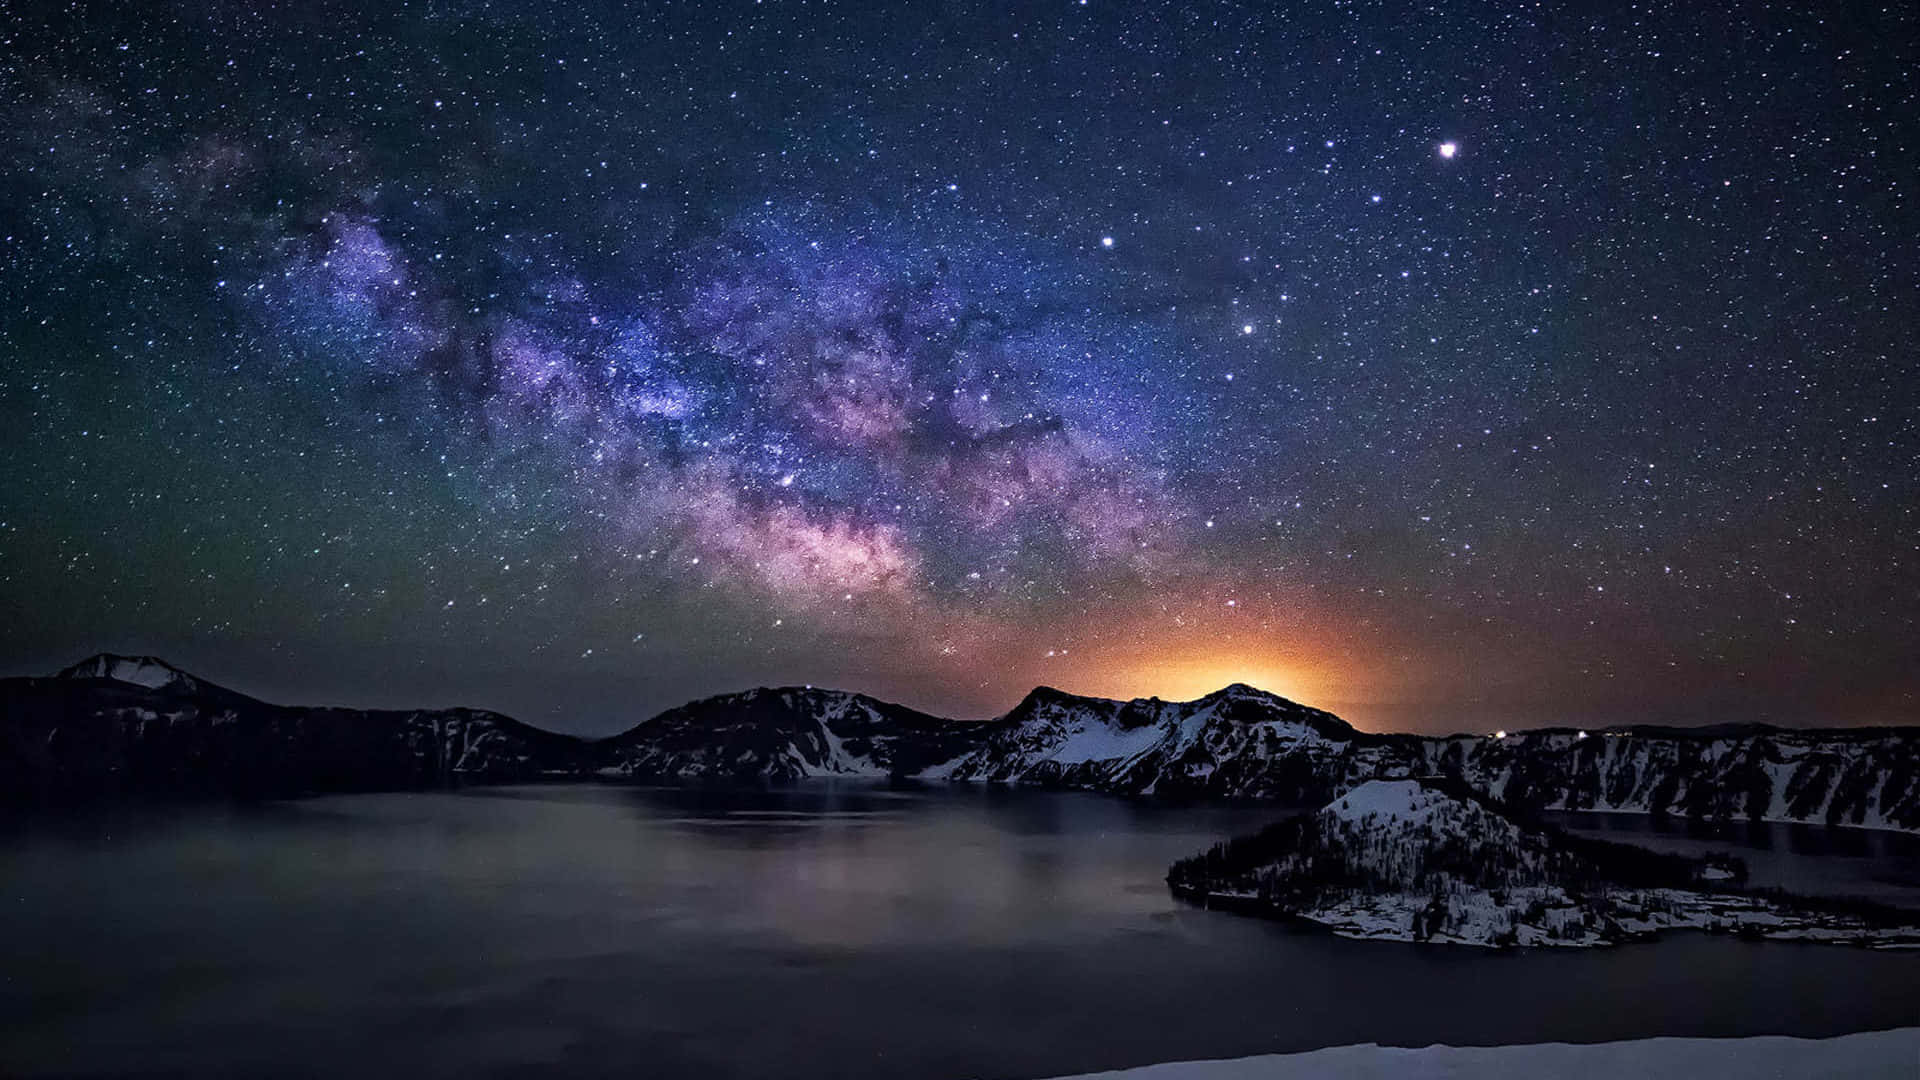 A breathtaking view of night sky